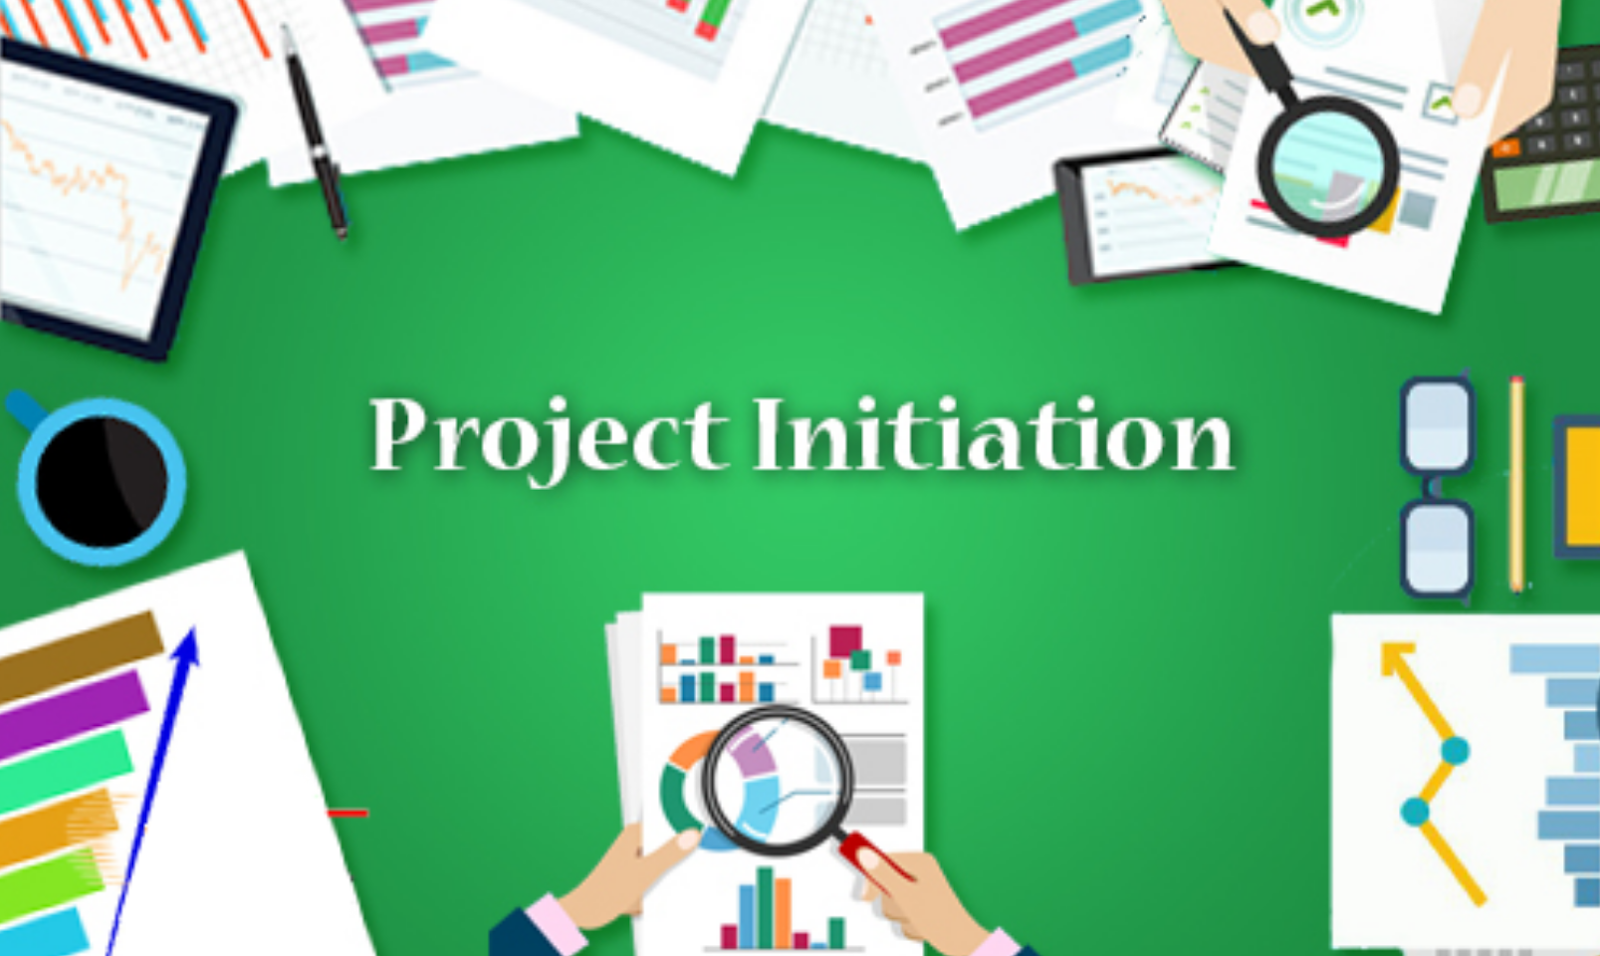 Project Initiation